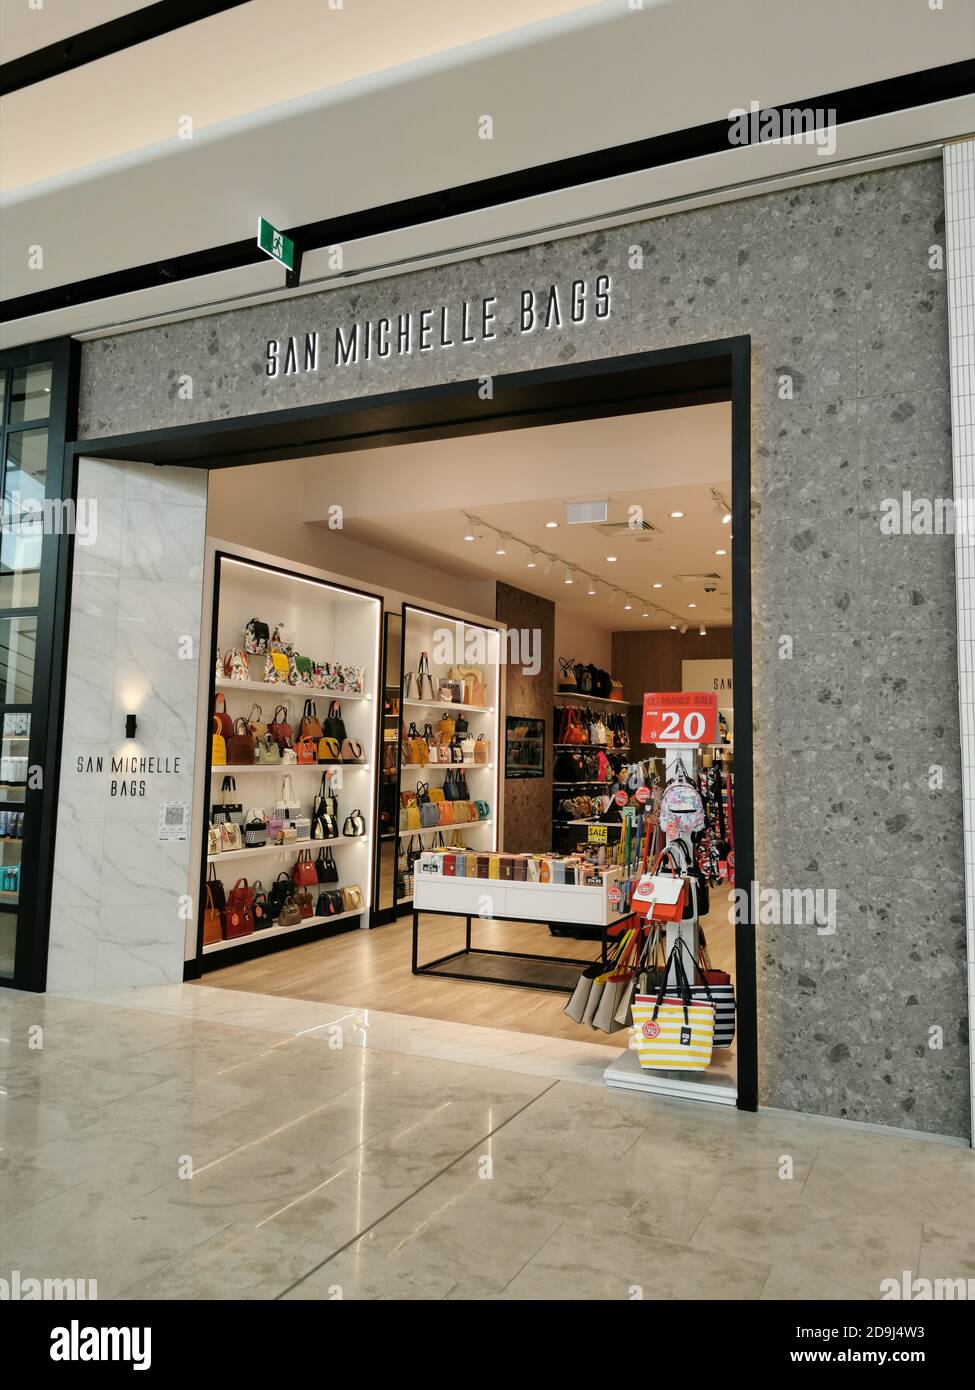 AUCKLAND, NEW ZEALAND - Nov 03, 2020: View of San Michelle Bags store in Sylvia Park Shopping Centre mall Stock Photo